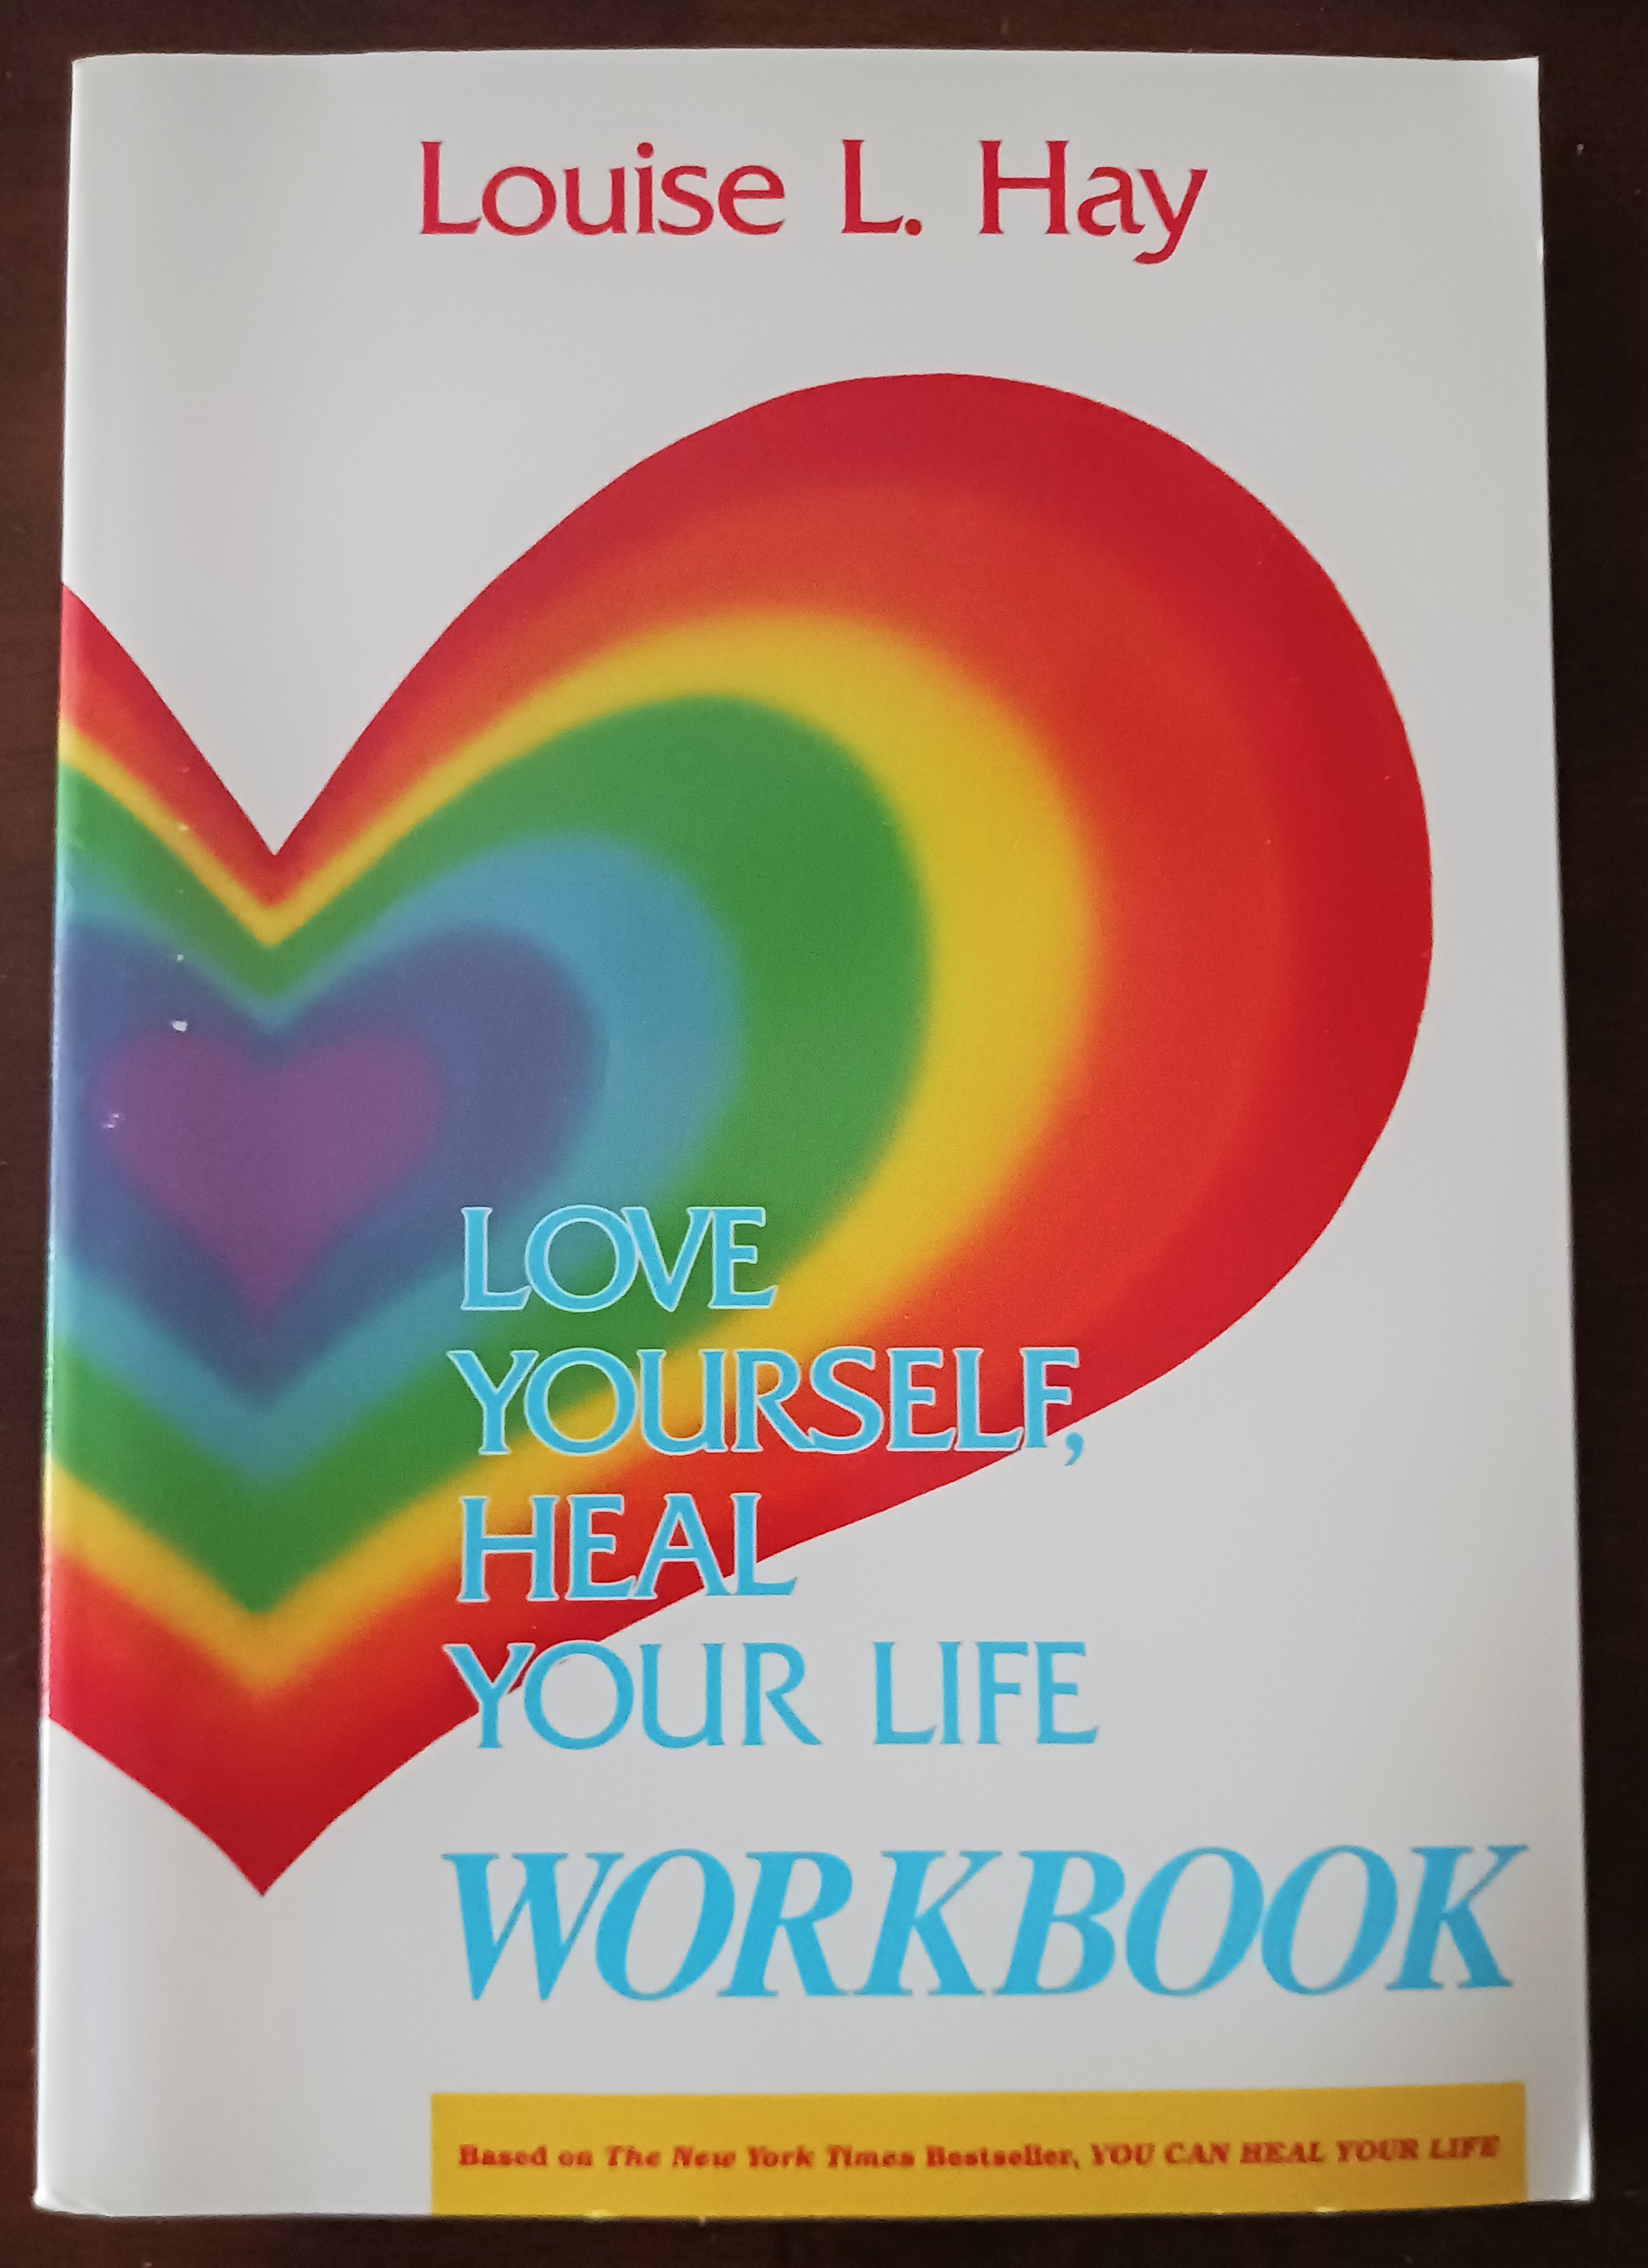 Louise L Hay Books - Biography and List of Works - Author of You